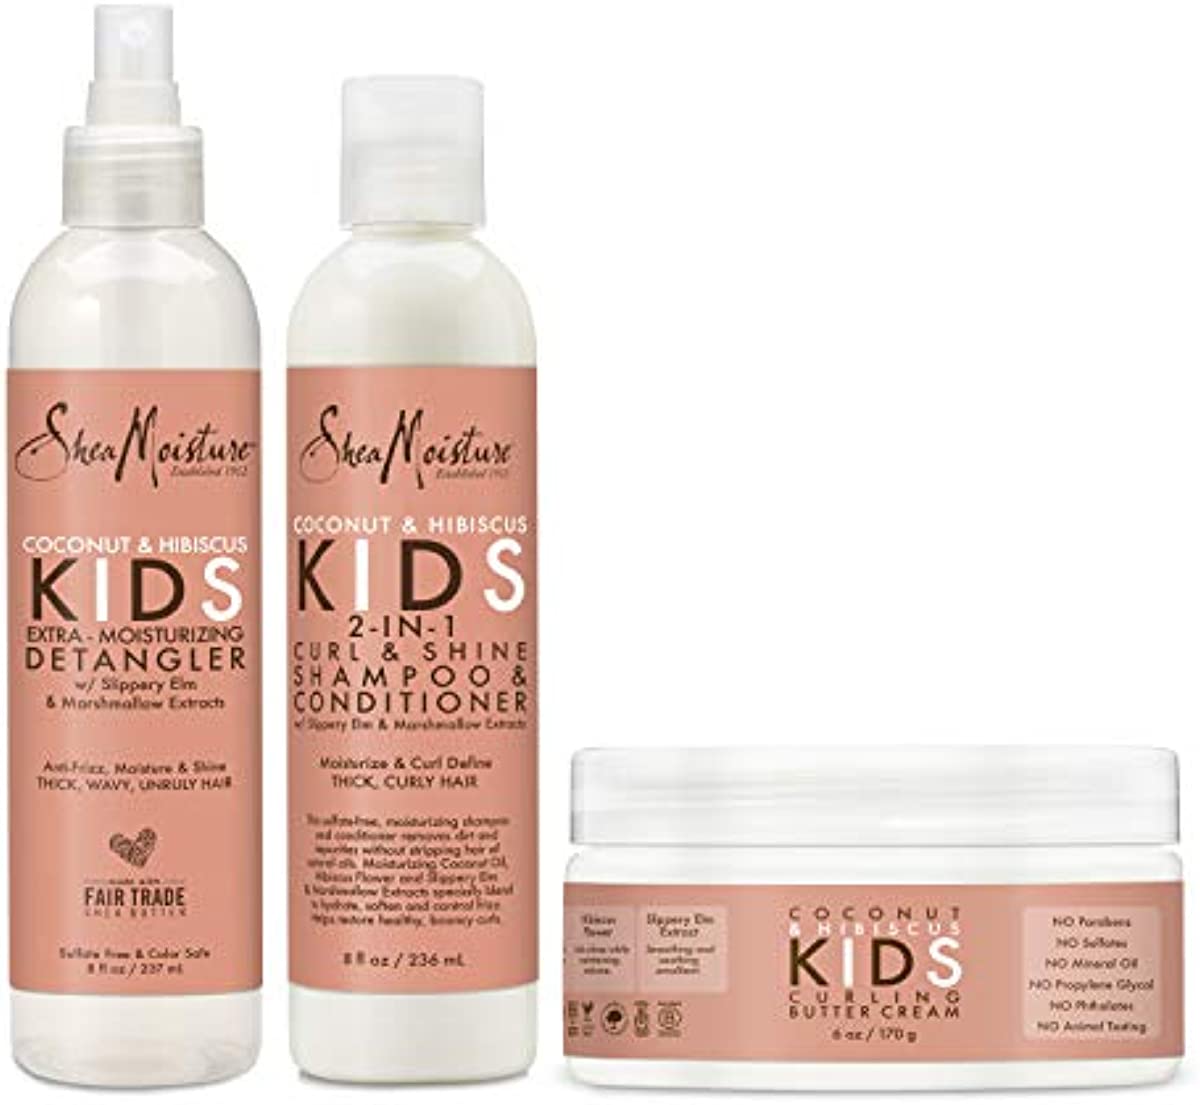 SheaMoisture Kids Shampoo, Detangler and Cream For Moisture and Shine Coconut and Hibiscus Sulfate Free Kids Shampoo and Conditioner, 3.0 Count, White